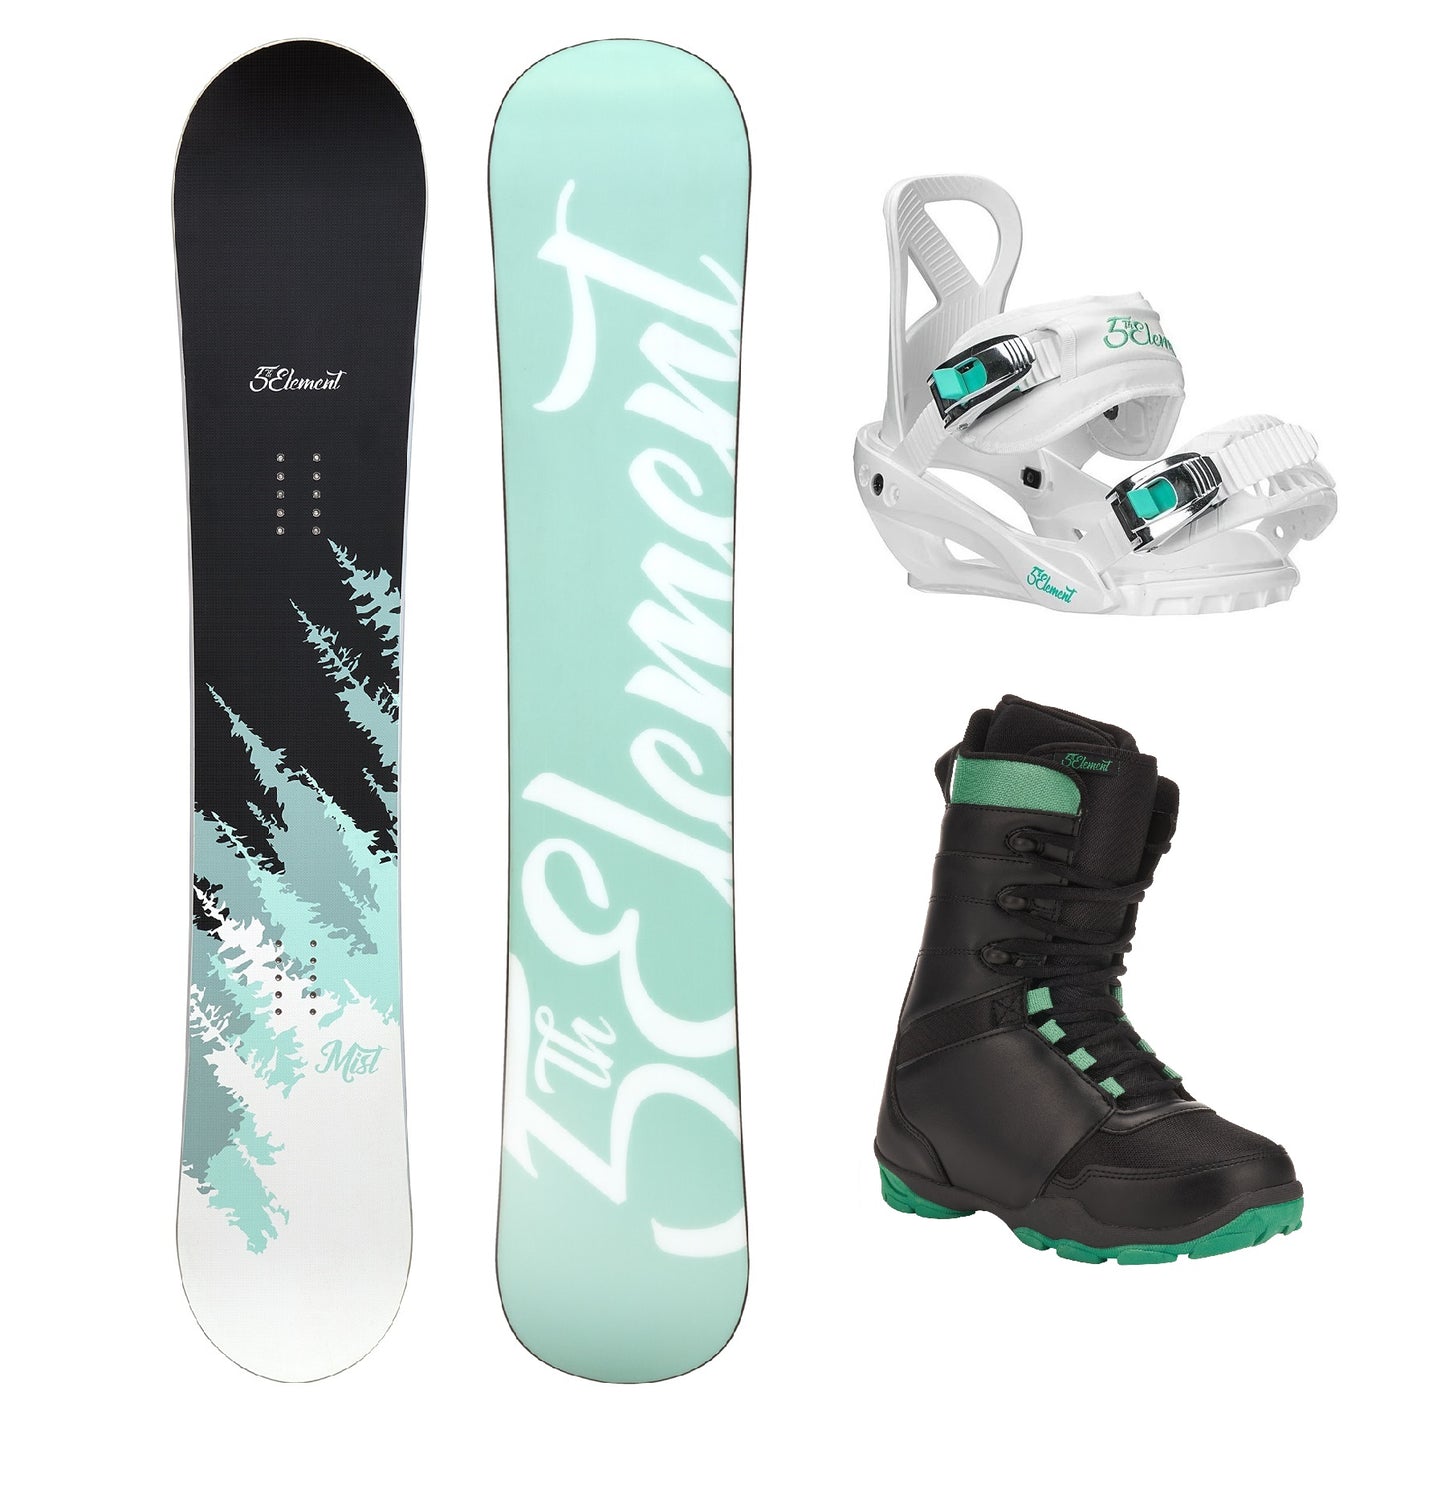 5th Element Mist Complete Snowboard Package - White/Teal Black